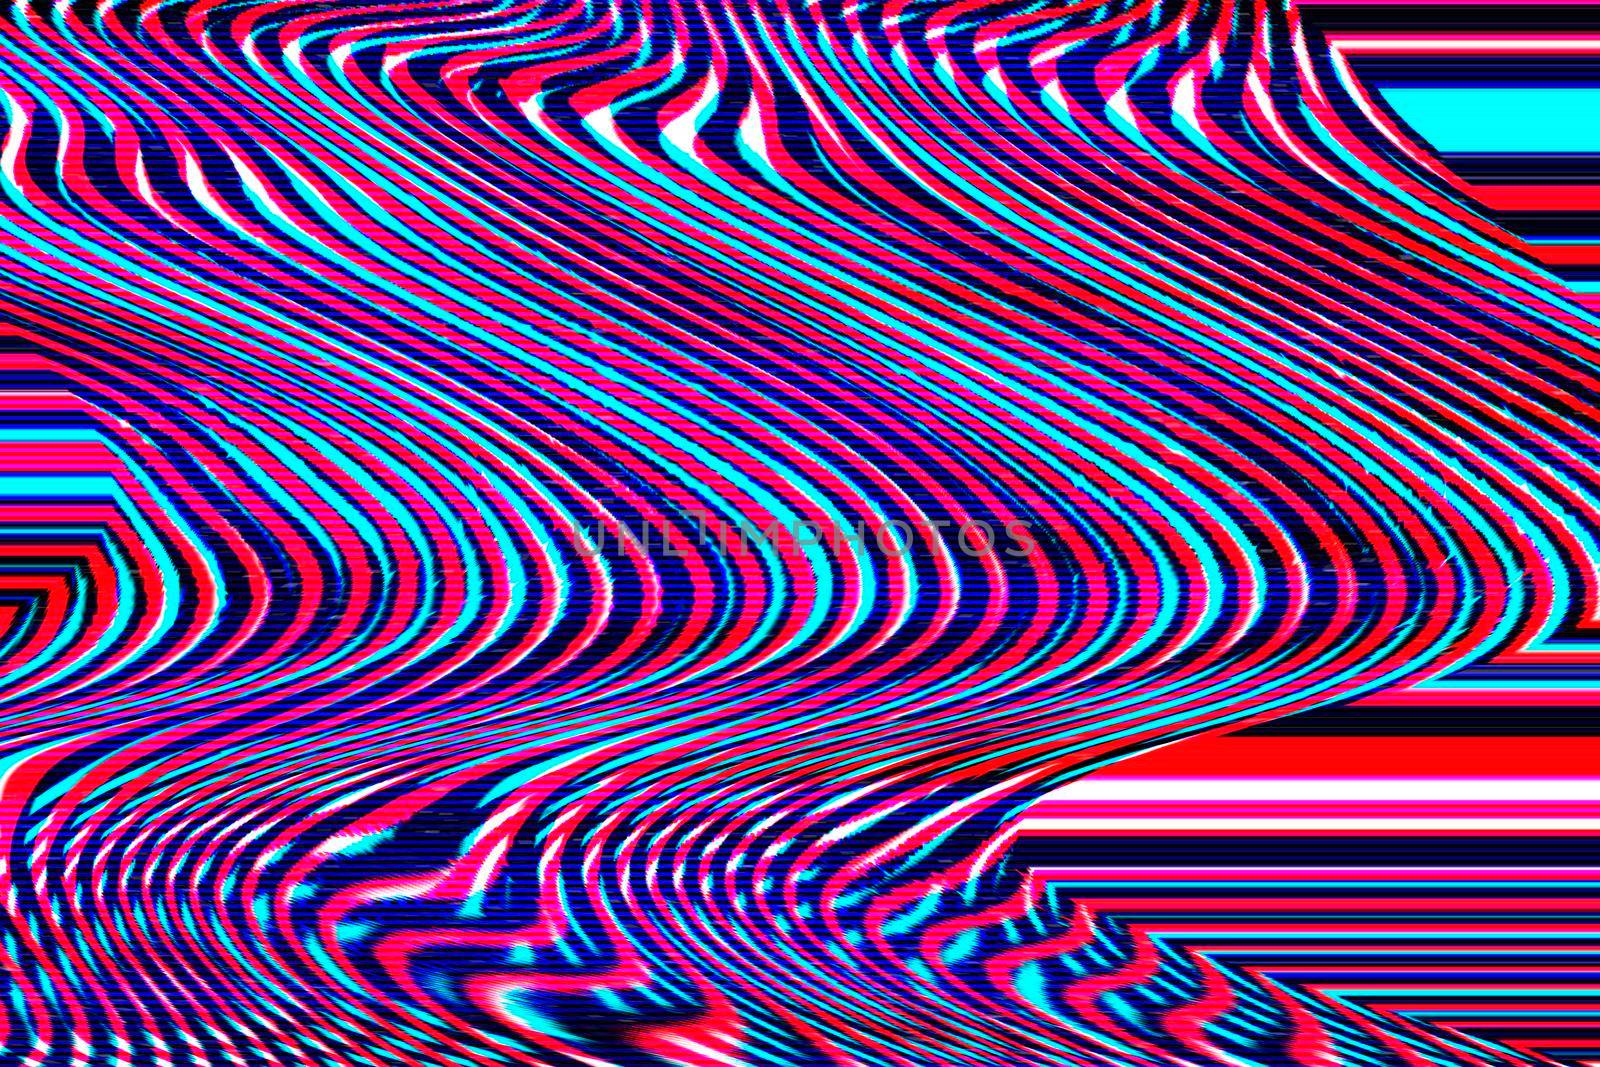 Glitch universe background Old TV screen error Digital pixel noise abstract design Photo glitch Television signal fail. Technical problem grunge wallpaper. Colorful noise.